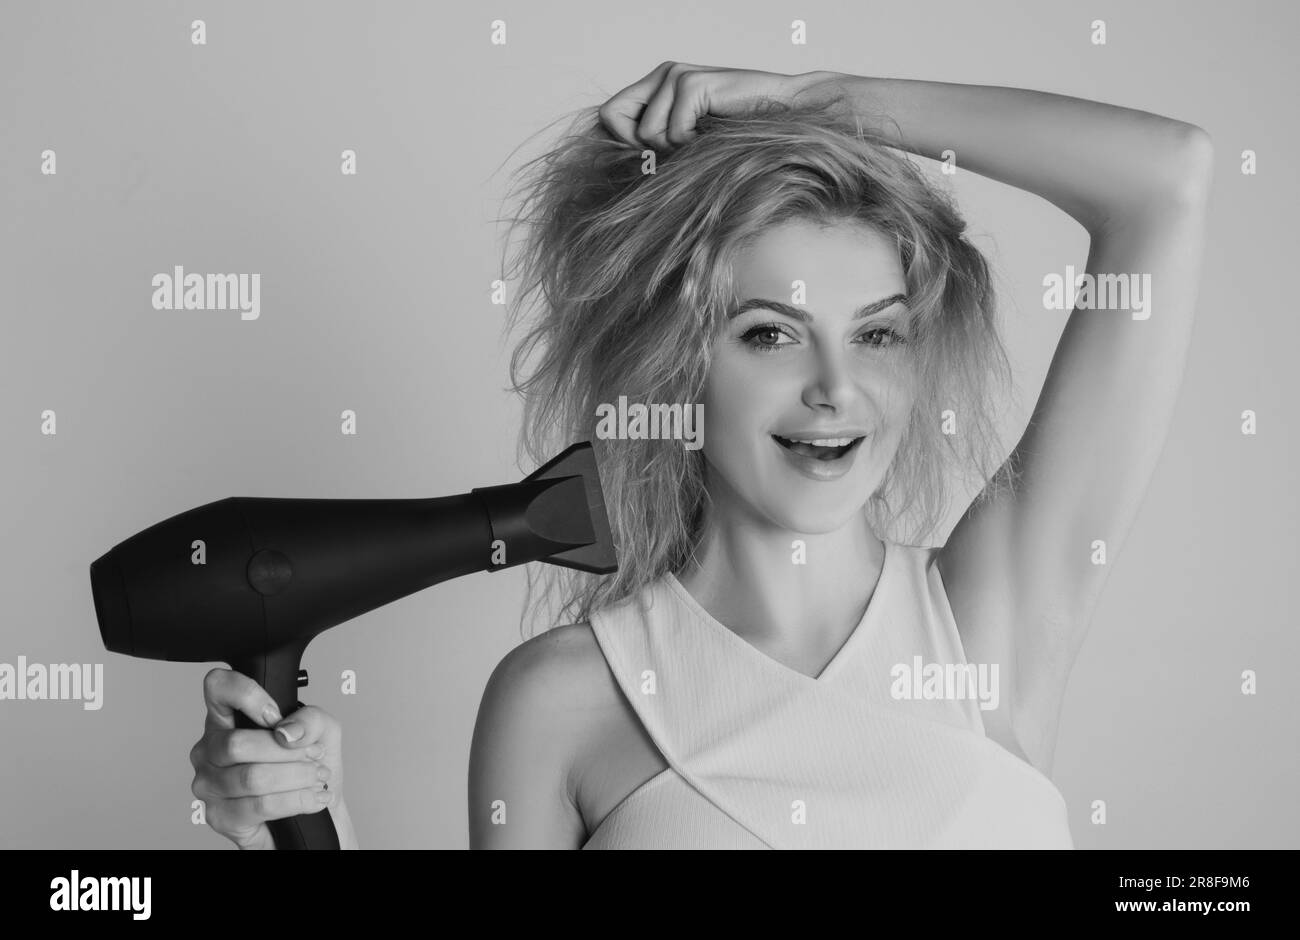 Health hair and beauty concept. Girl with blonde hair using hairdryer. Young attractive happy laughing blonde woman with hair dryer. Hairstyle Stock Photo